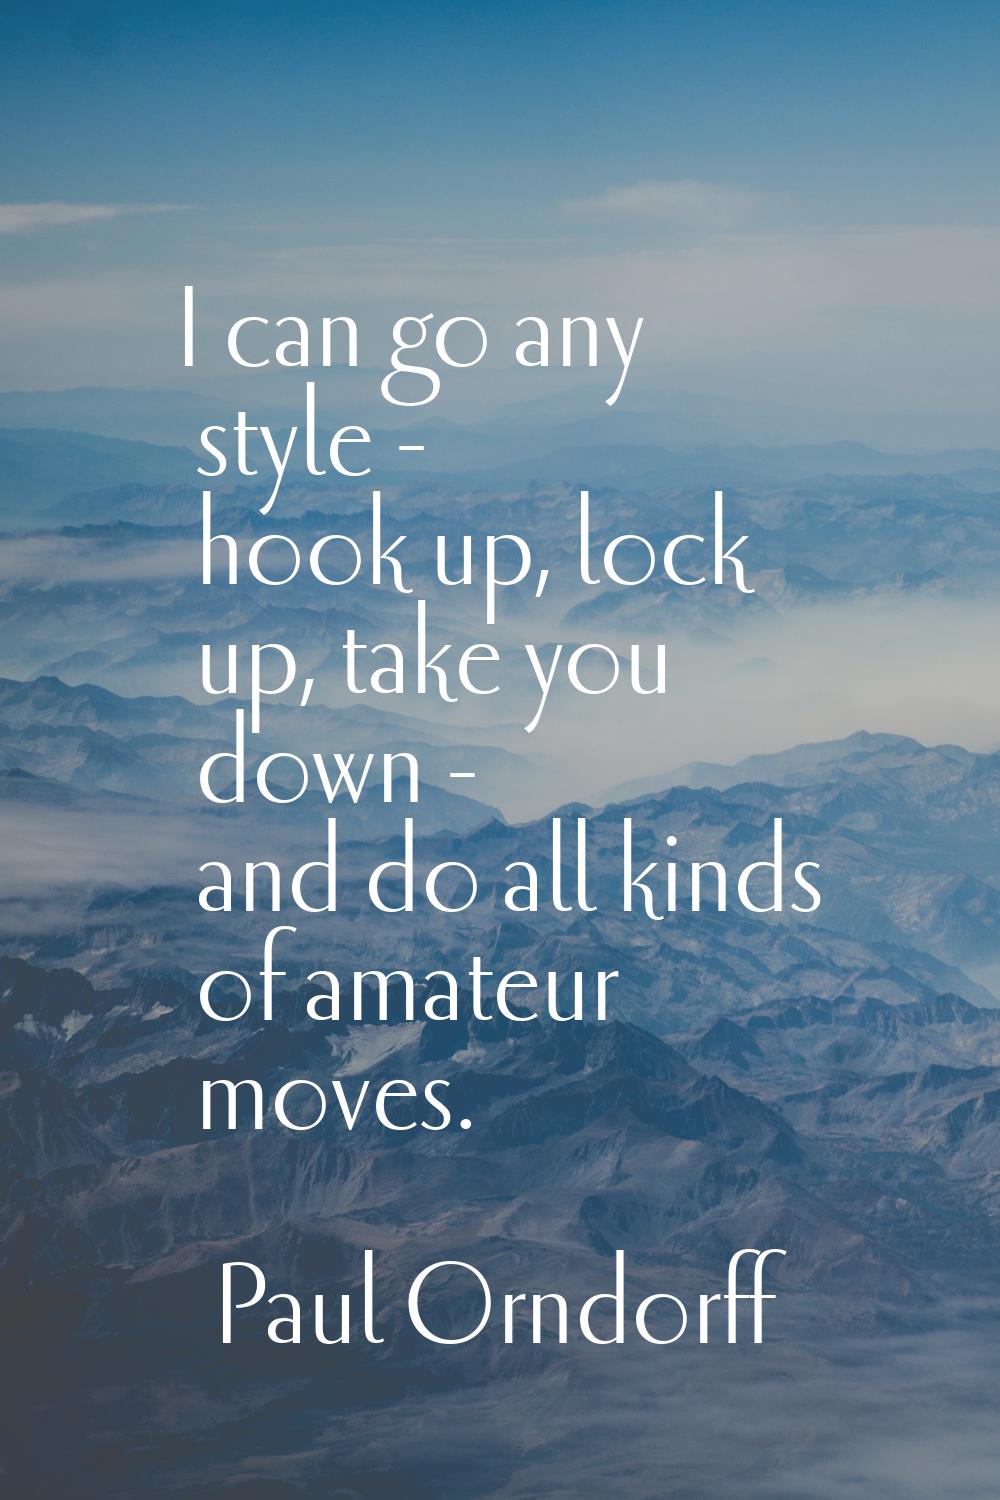 I can go any style - hook up, lock up, take you down - and do all kinds of amateur moves.